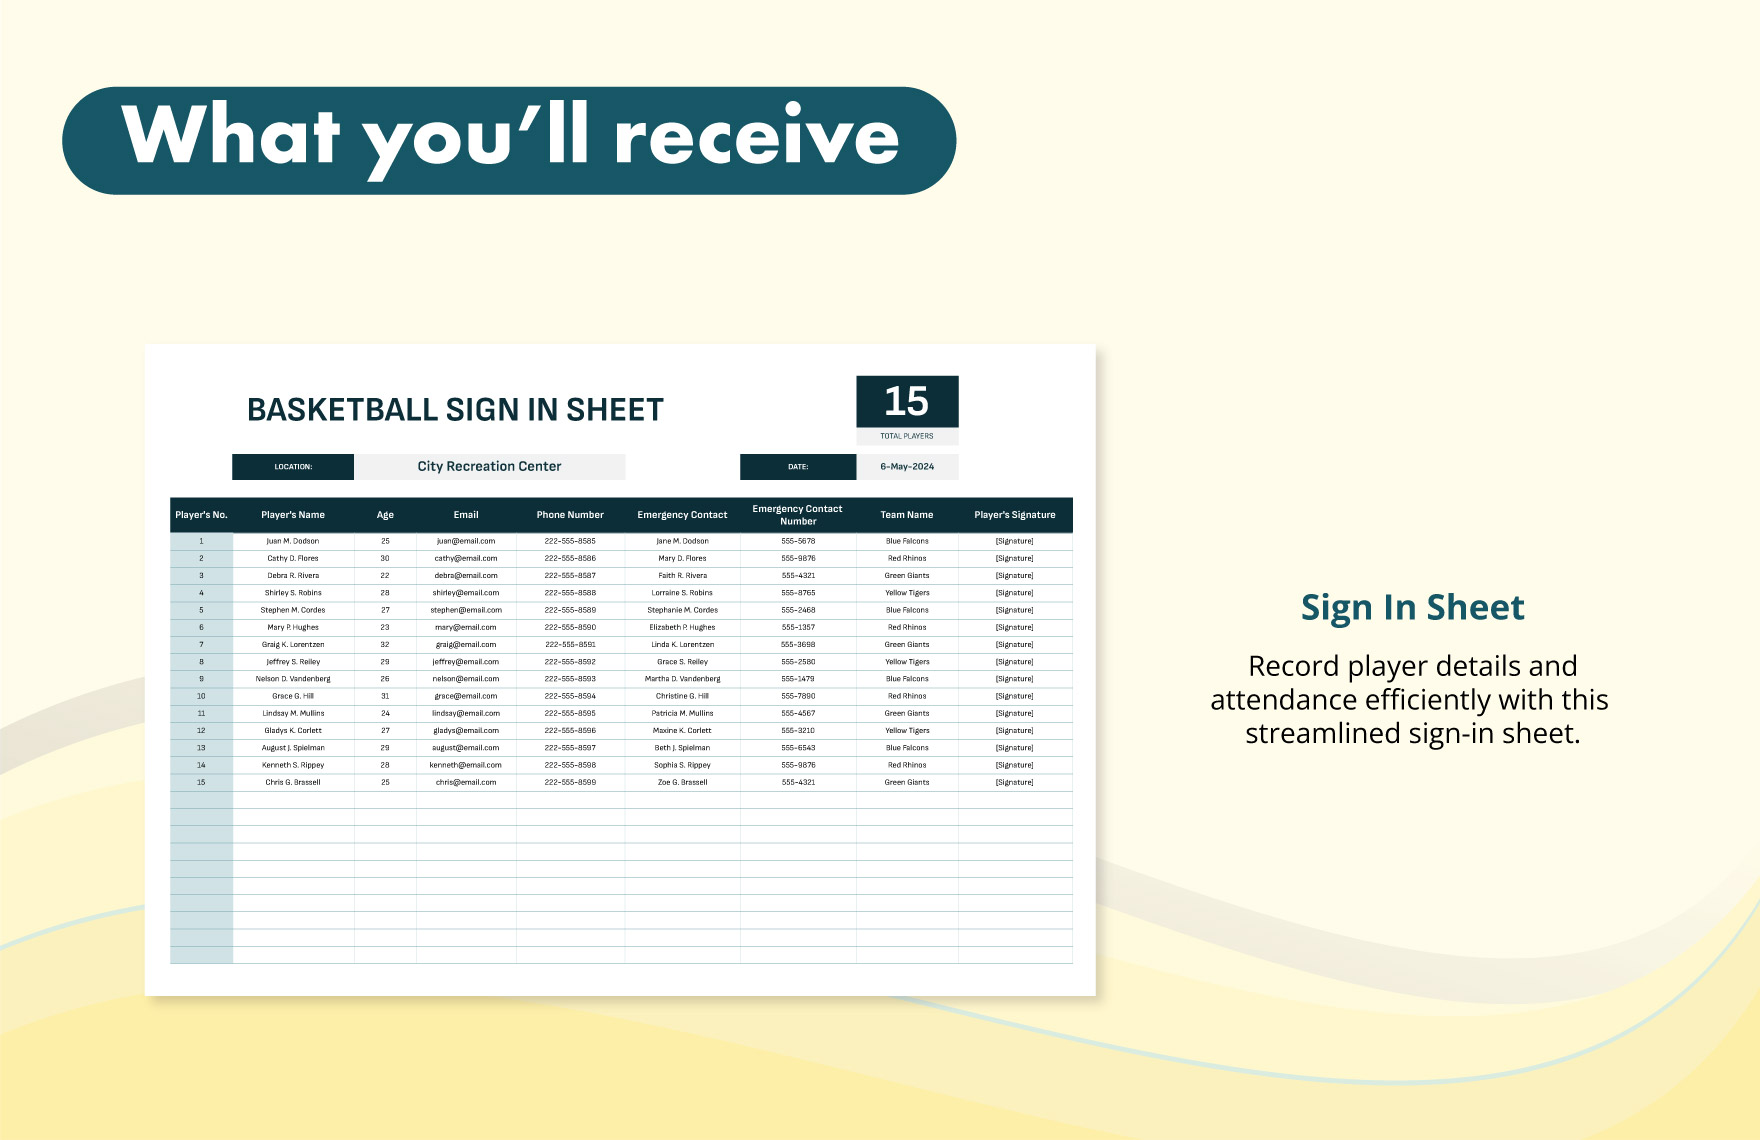 Basketball Sign in Sheet Template